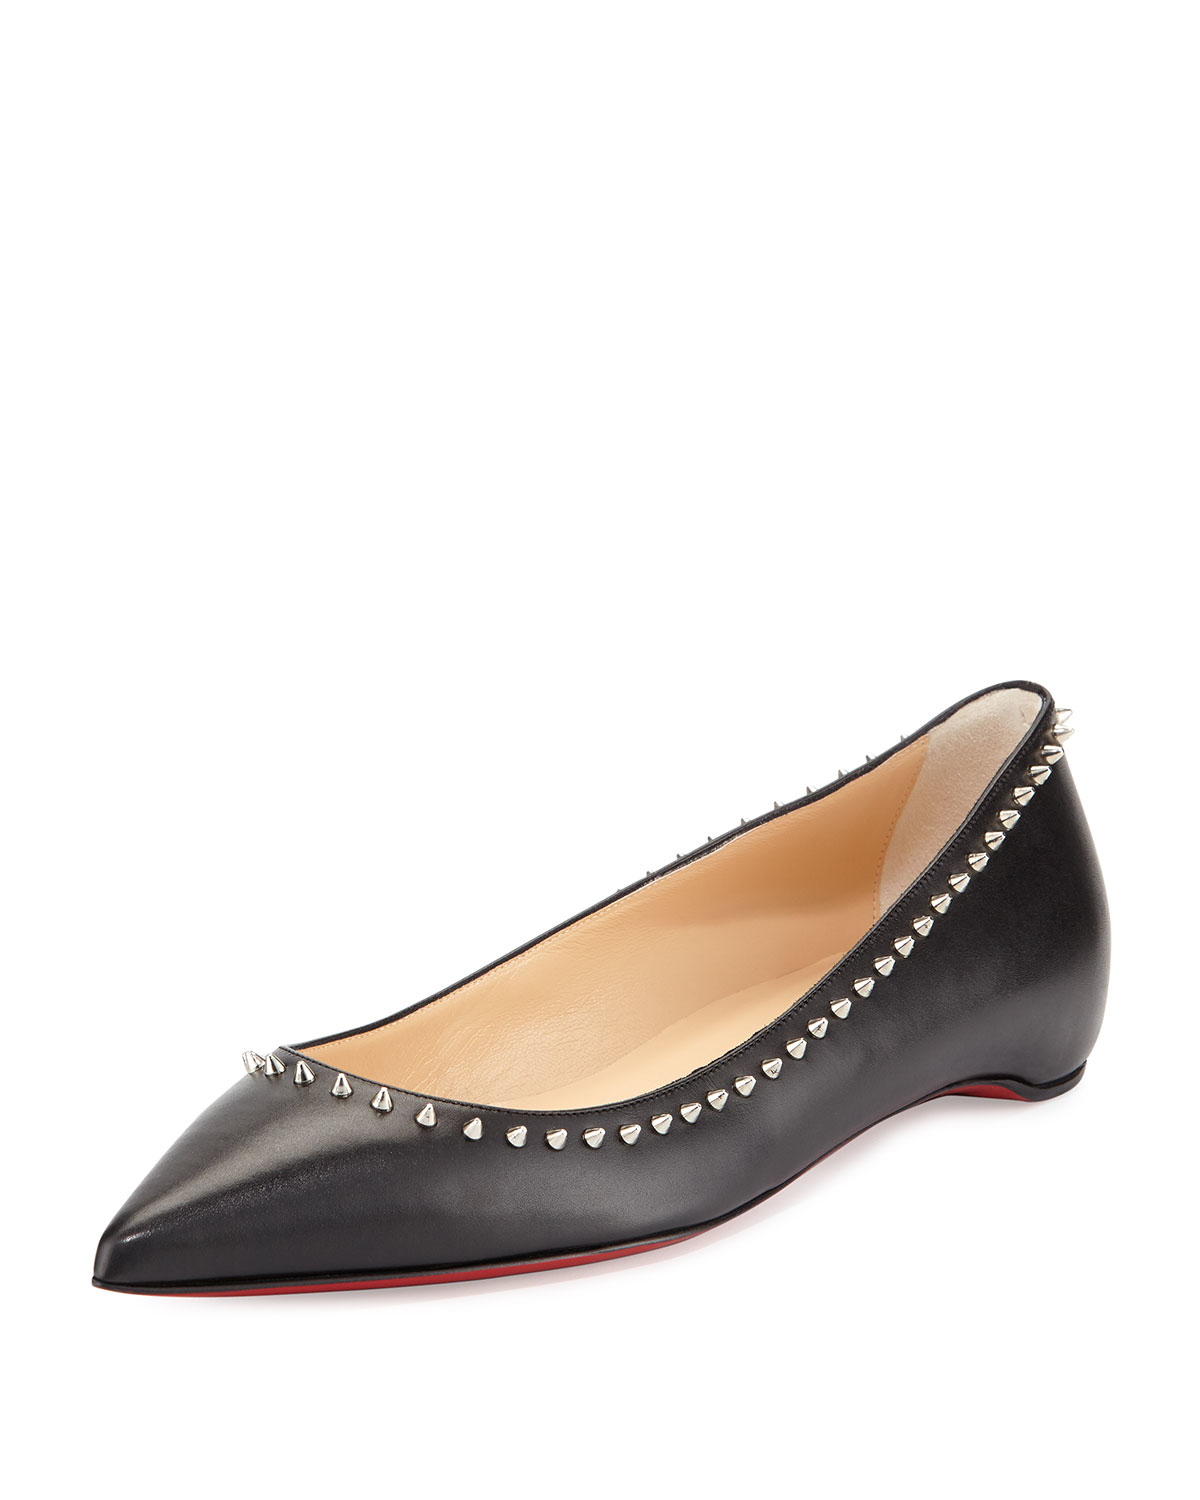 christian louboutin pointed-toe flats Black suede | cosmetics ...